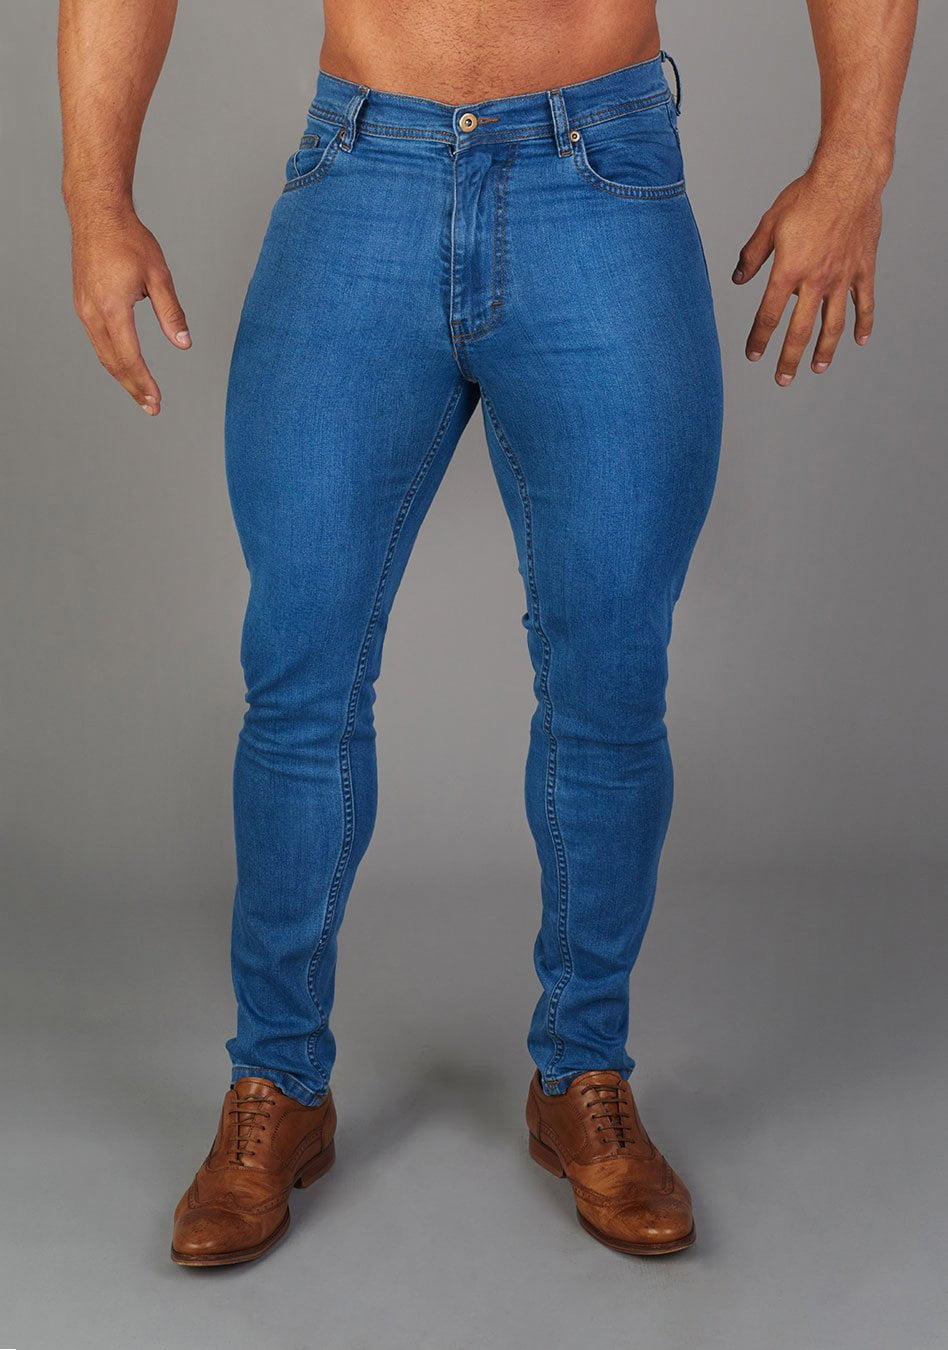 Men's Athletic Fit Jeans | Oxcloth